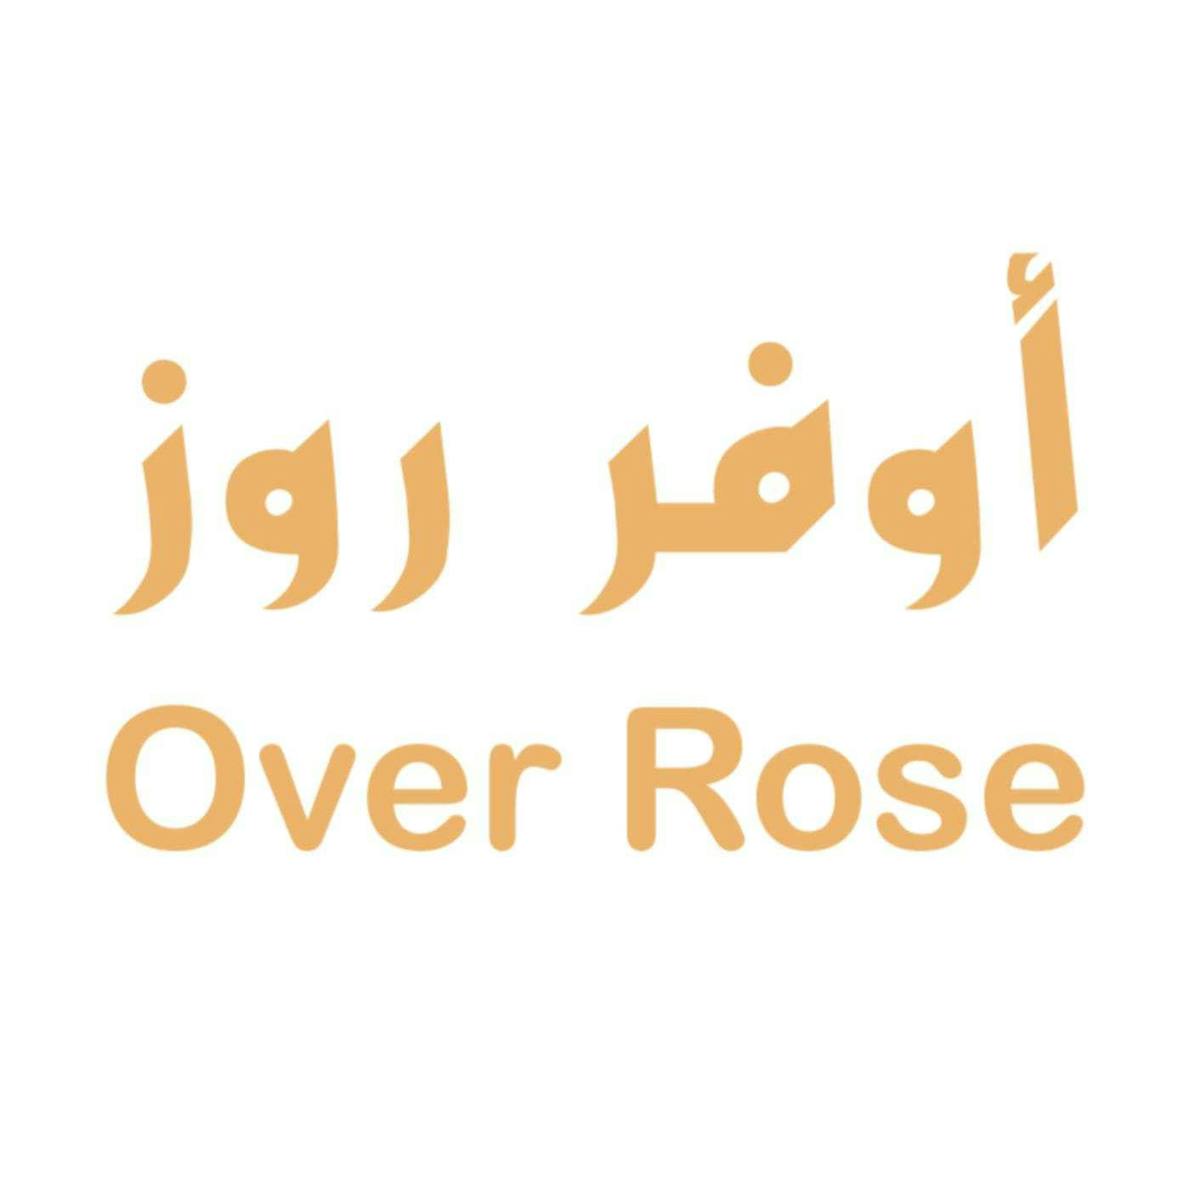 Over Rose